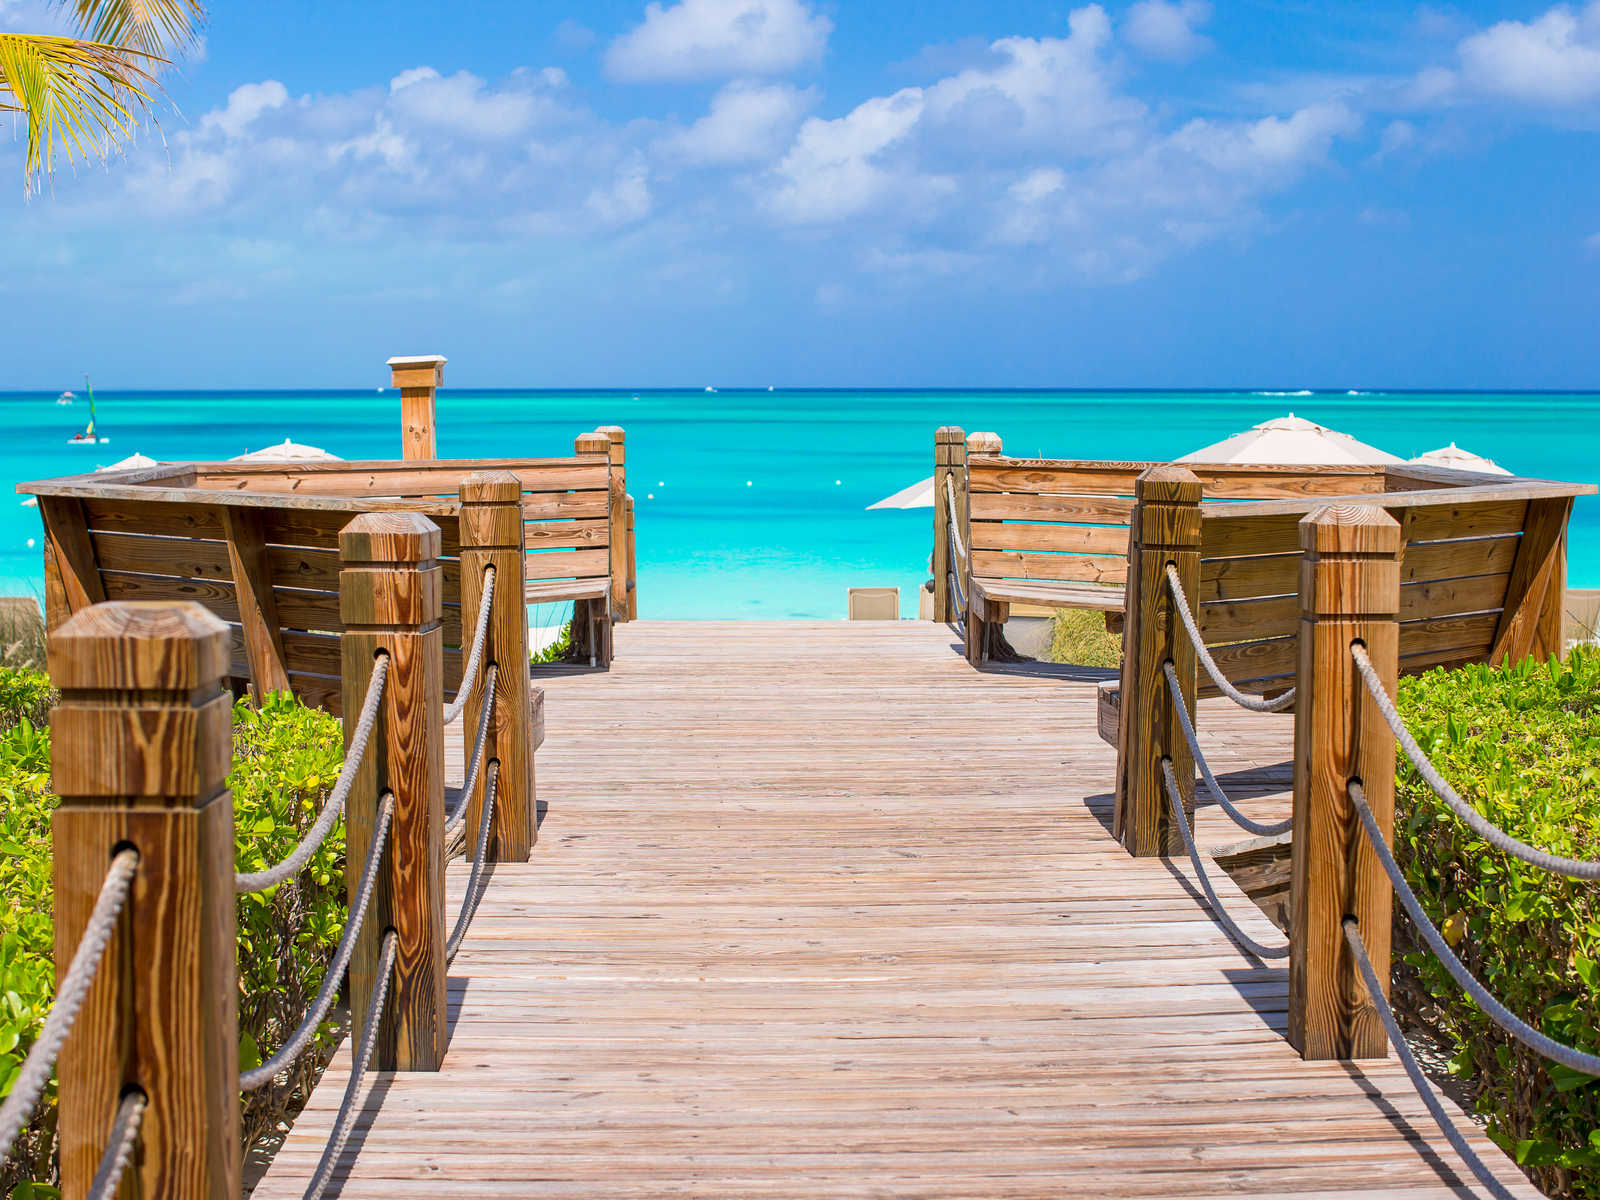 Gorgeous tropical island of Turks and Caicos during the best time to visit with a boat-looking dock